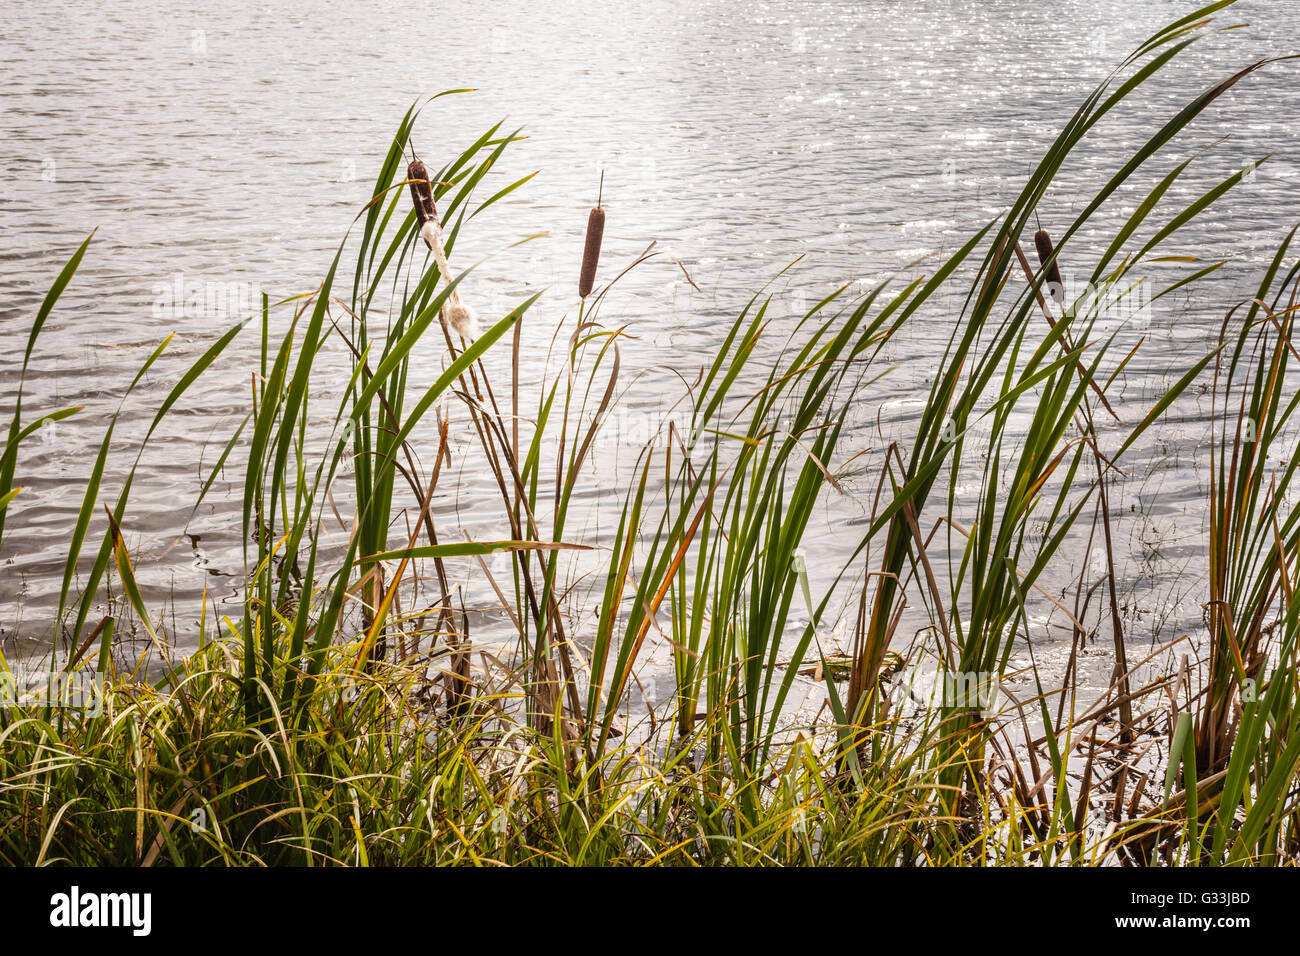 a tranquil pond with bullrushes on a calm summer day Stock Photo